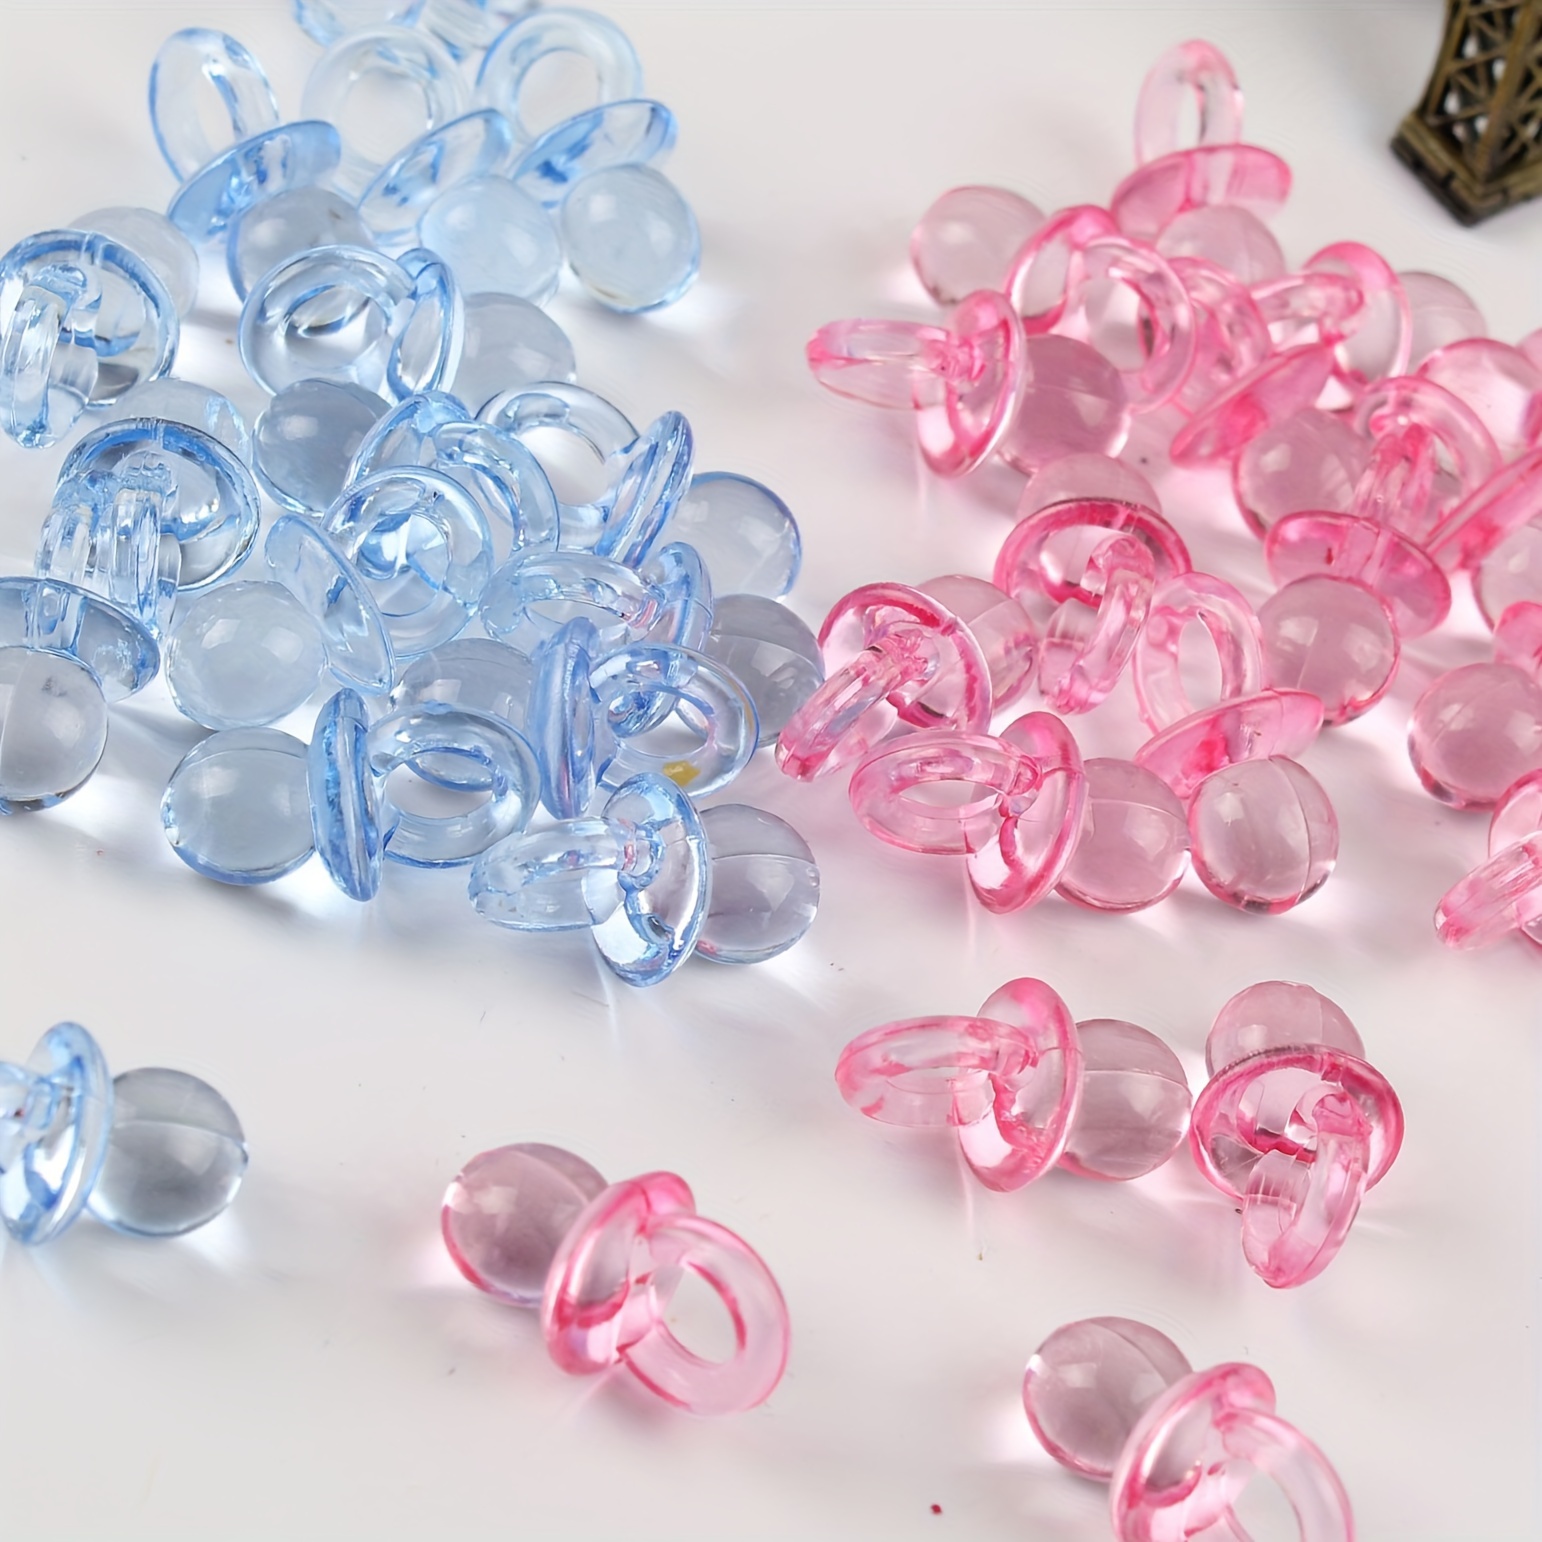 

100pcs Pacifier Charm Pendants For Diy Crafting, Mini Pacifier Decorations For Baby Shower Party Favors, Teen And Adult Crafting Accessories, Assorted Transparent Colors